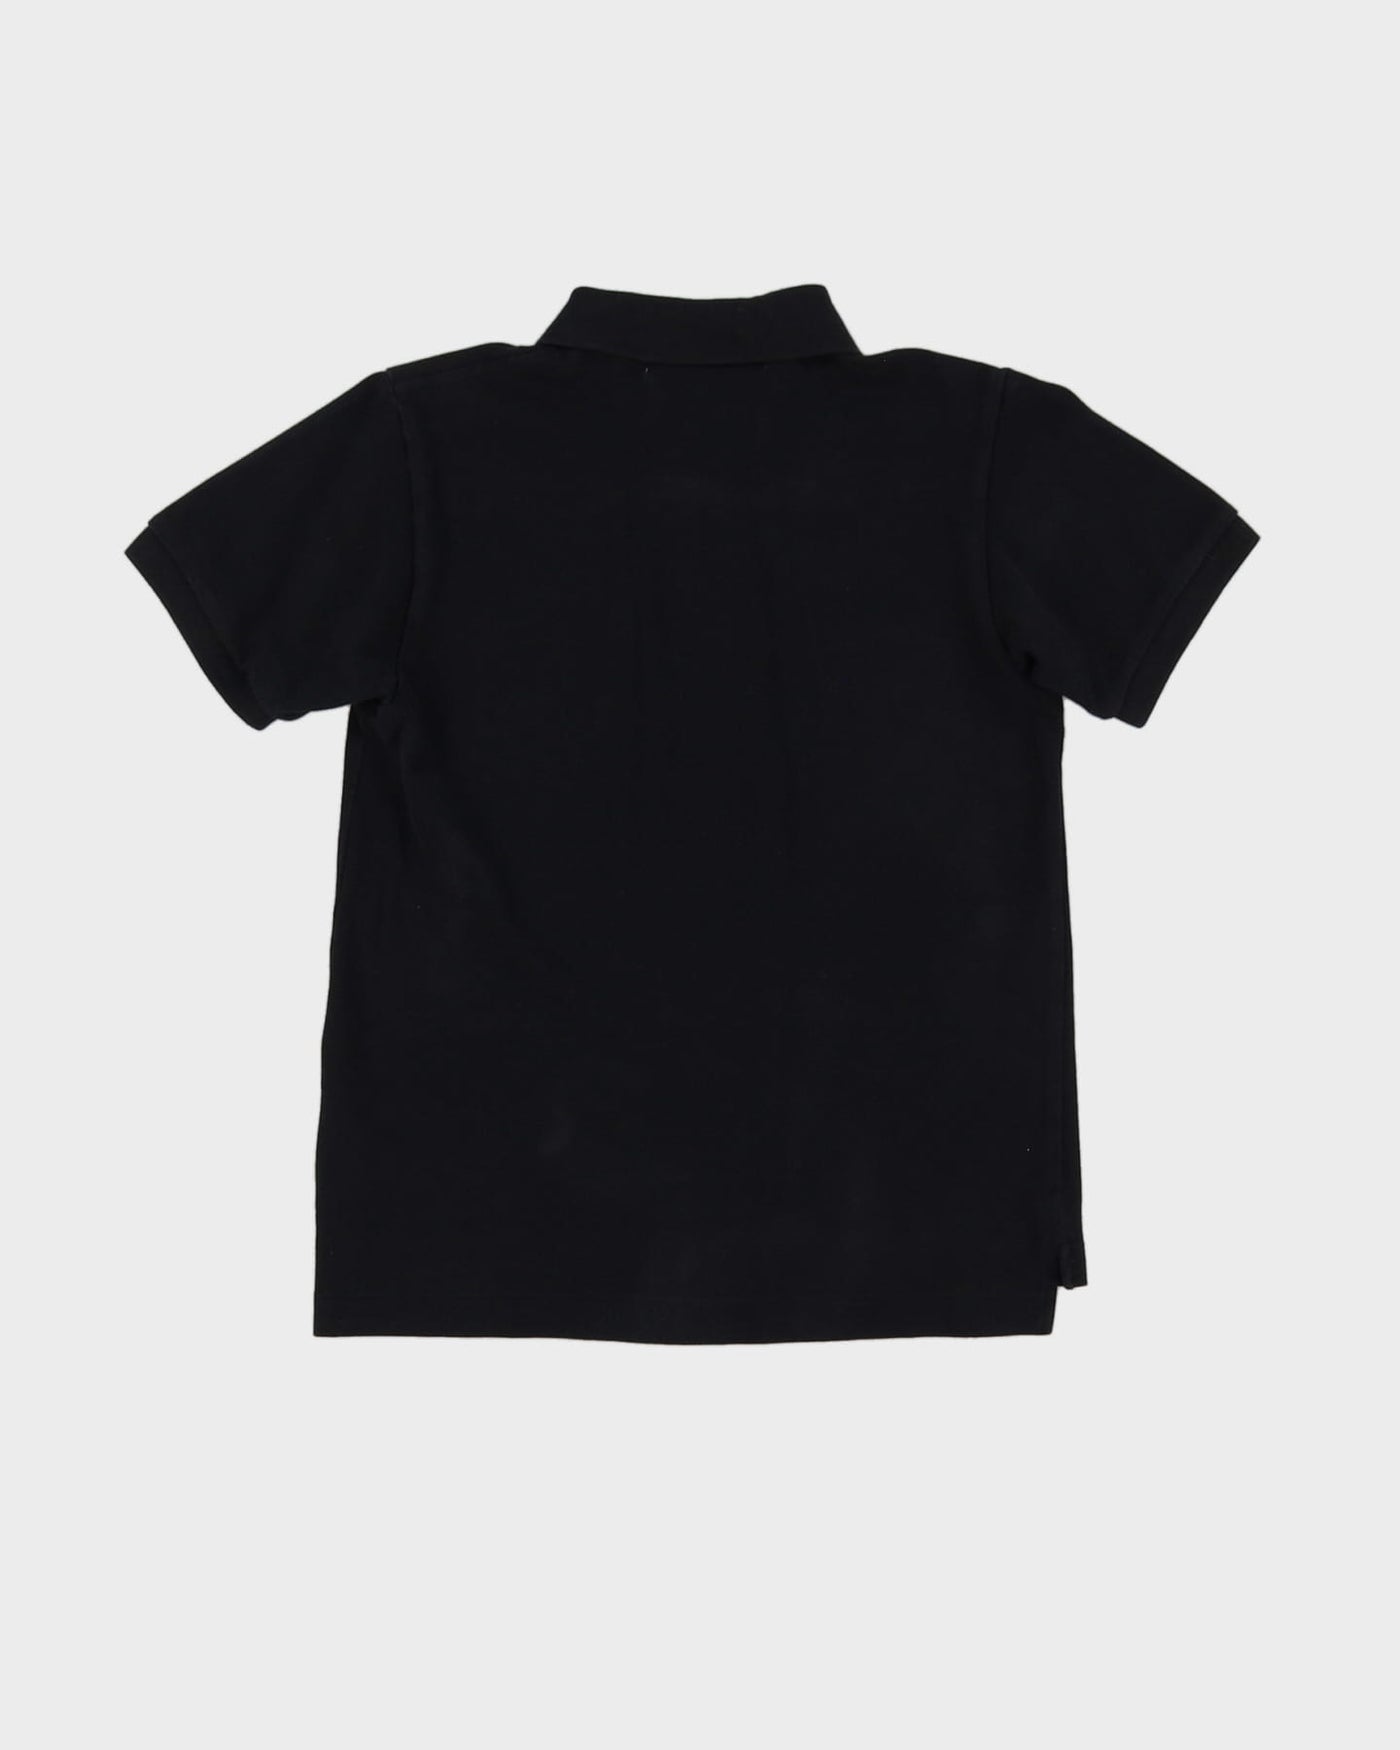 Comme Des Garcons Play Black Baby Fit Black Polo Shirt - S